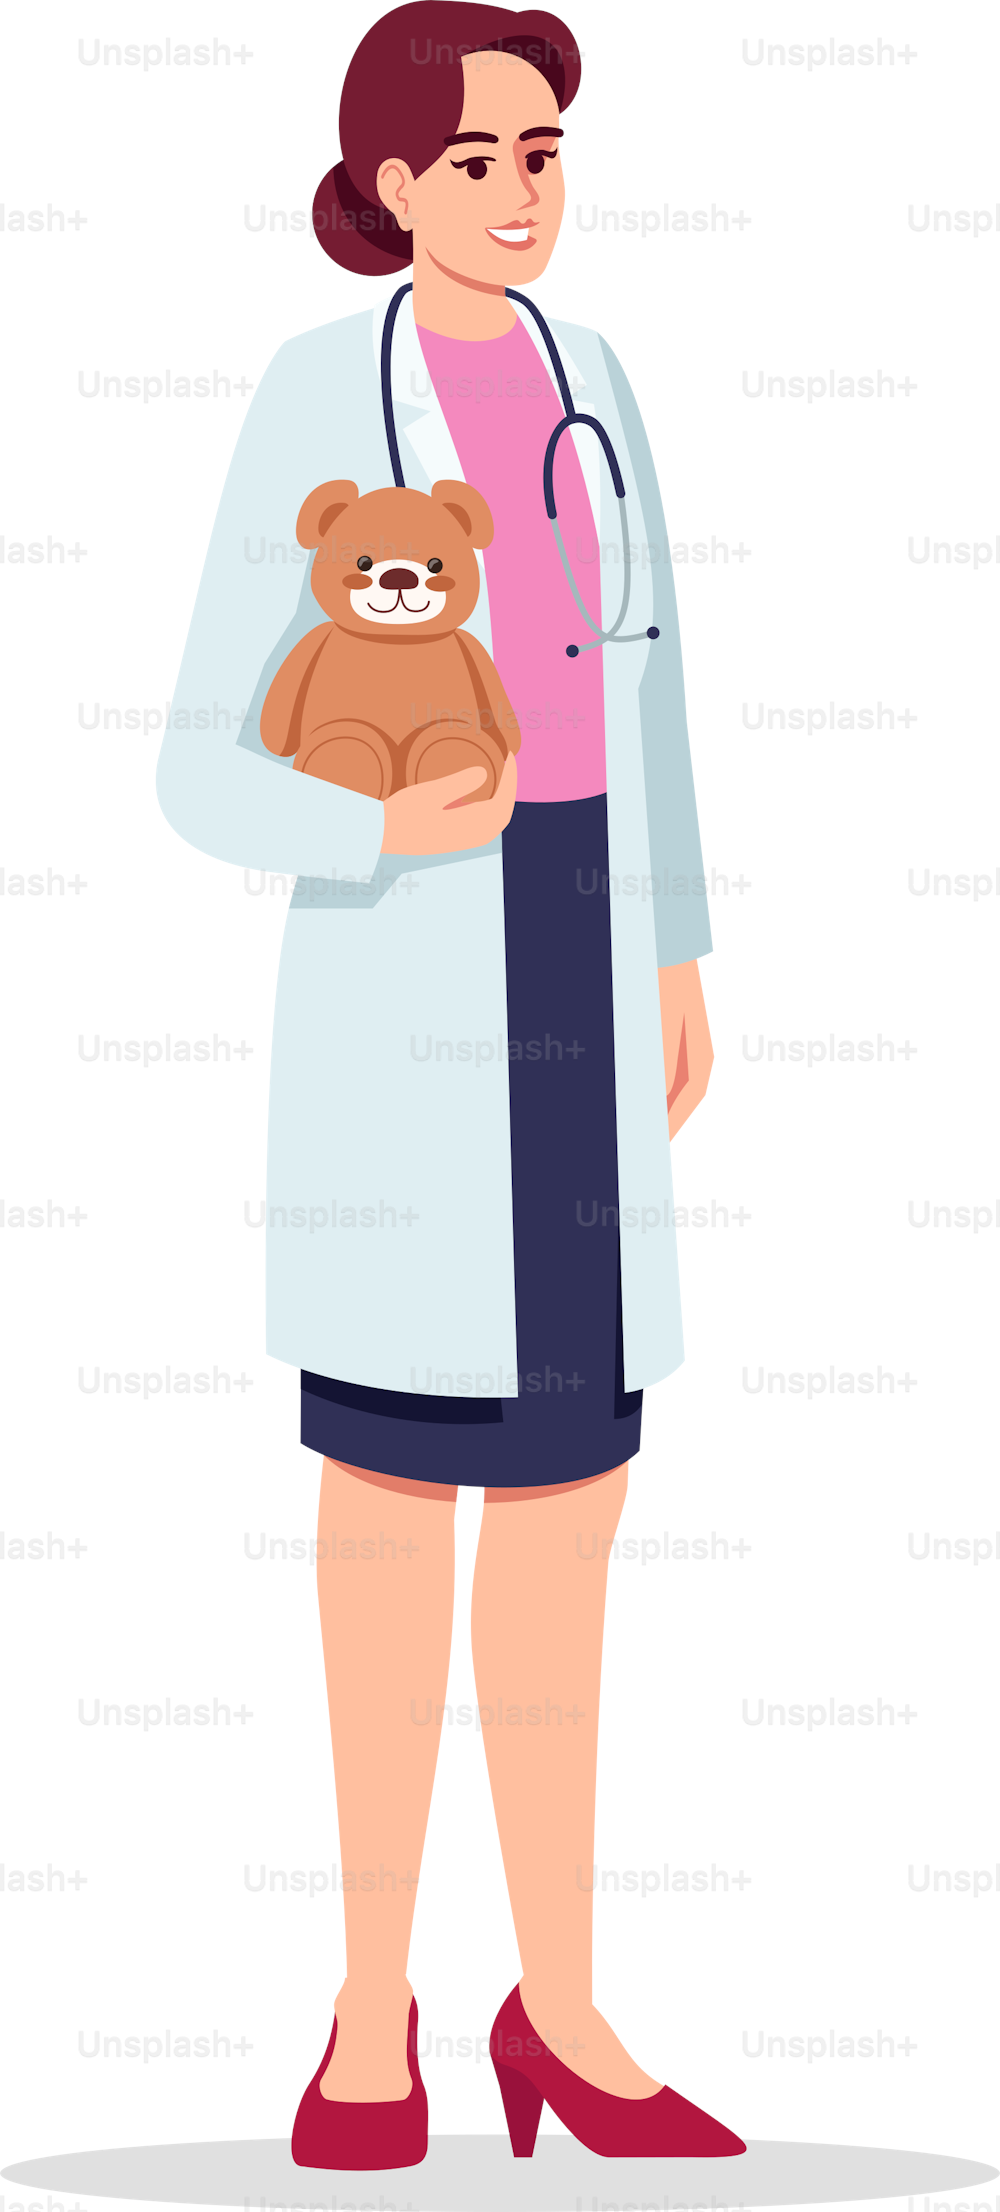 Baby doctor semi flat RGB color vector illustration. Children care doctor. Medical personnel. Young caucasian woman working as pediatrician isolated cartoon character on white background